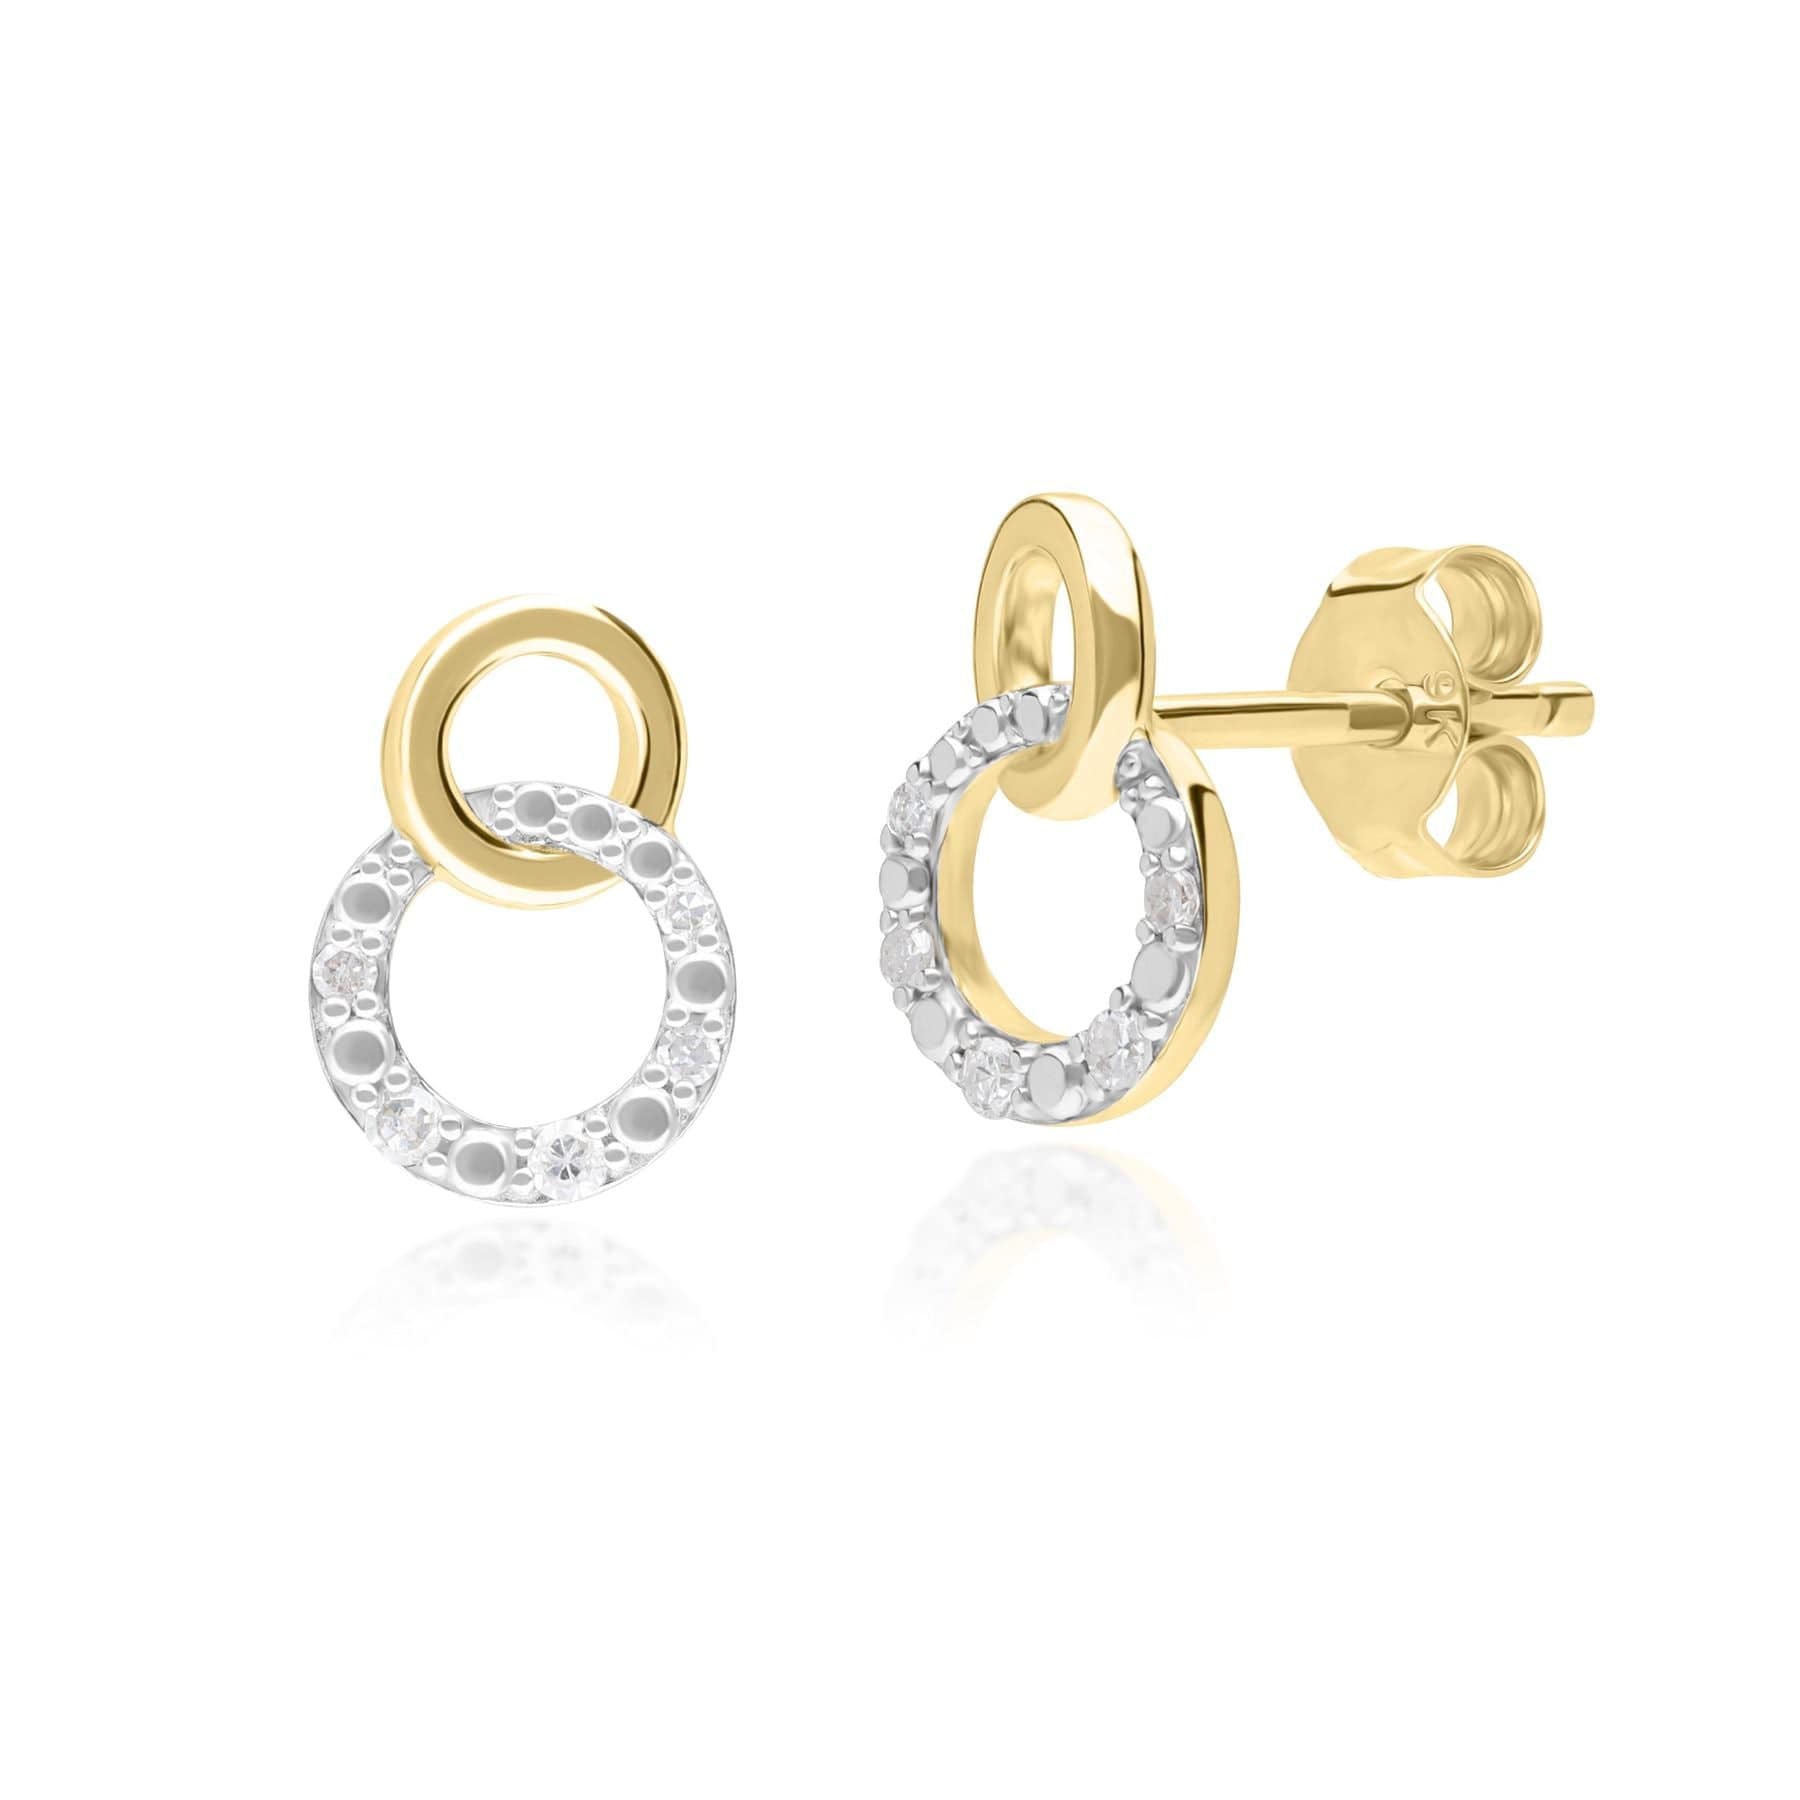 191E0433019 Diamond Pave Interlocking Hoop Stud Earrings in 9ct Yellow Gold Front